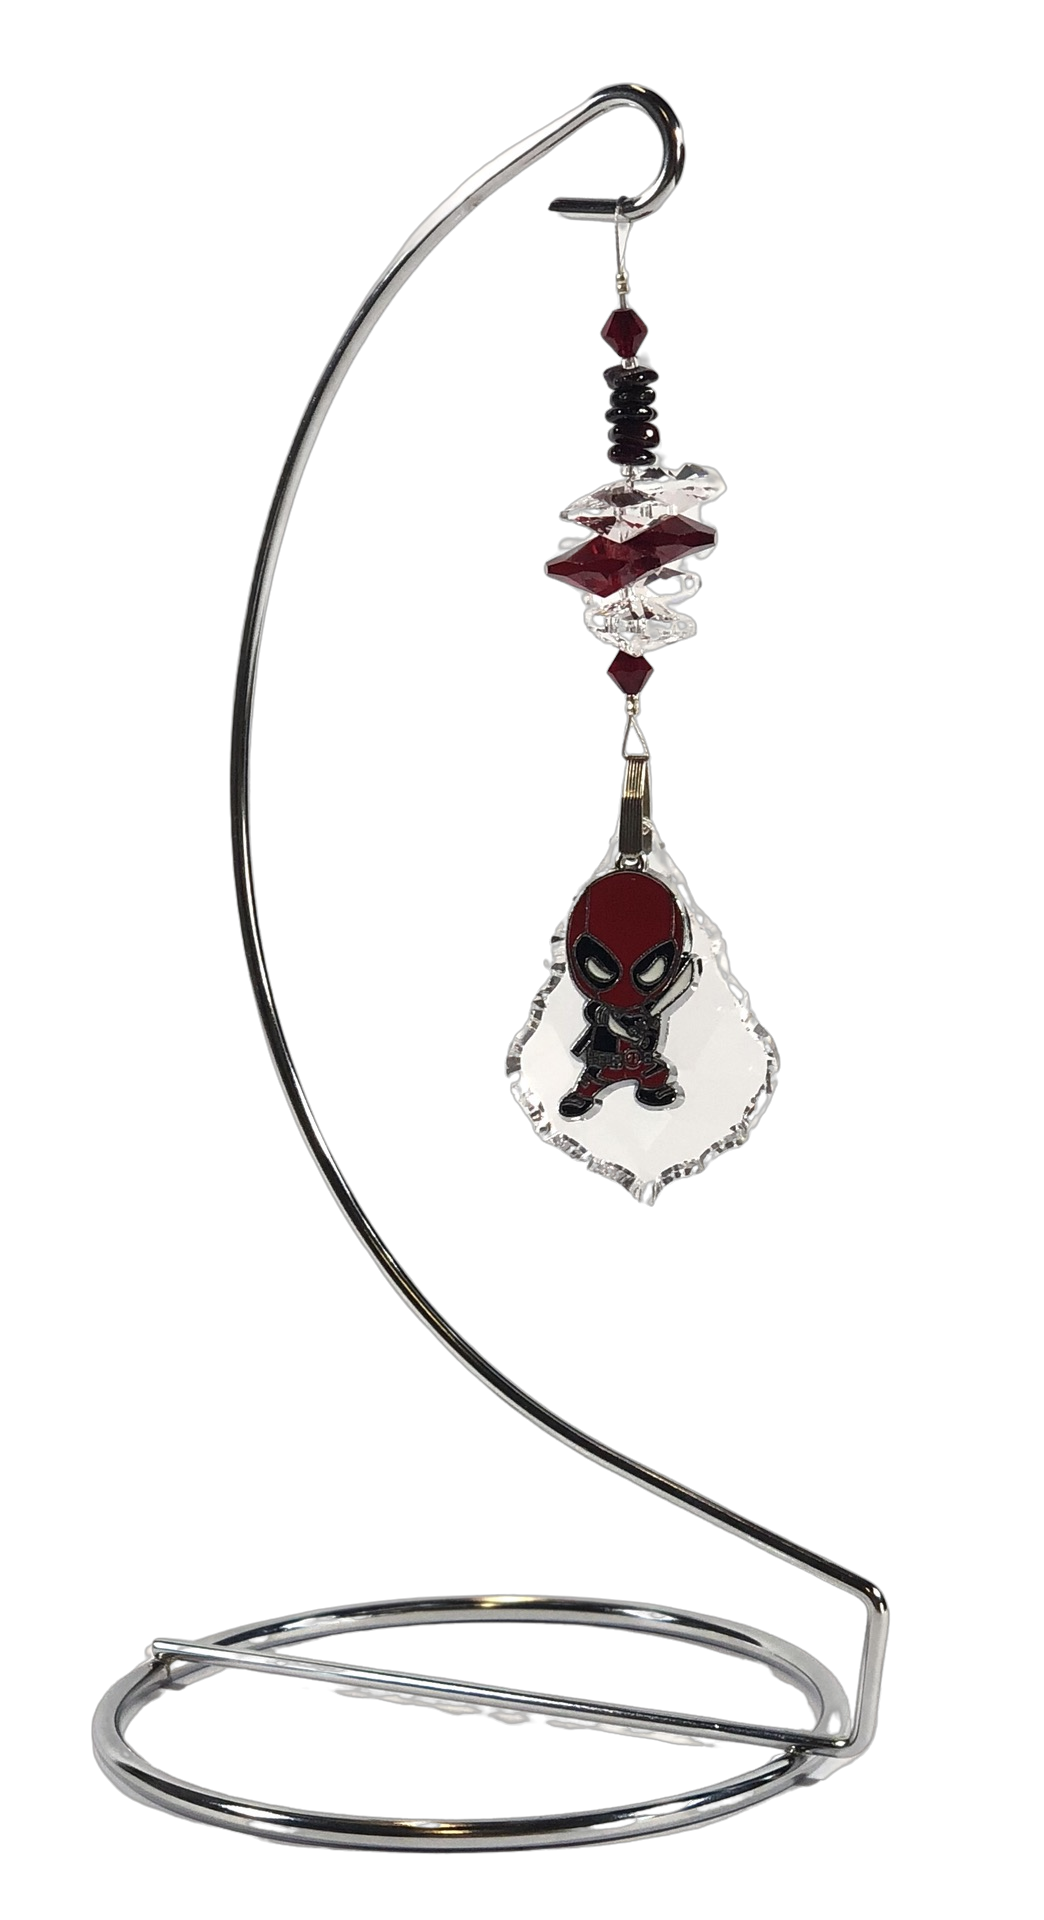 Deadpool - Marvel crystal suncatcher is decorated with garnet gemstones and come on this amazing stand.